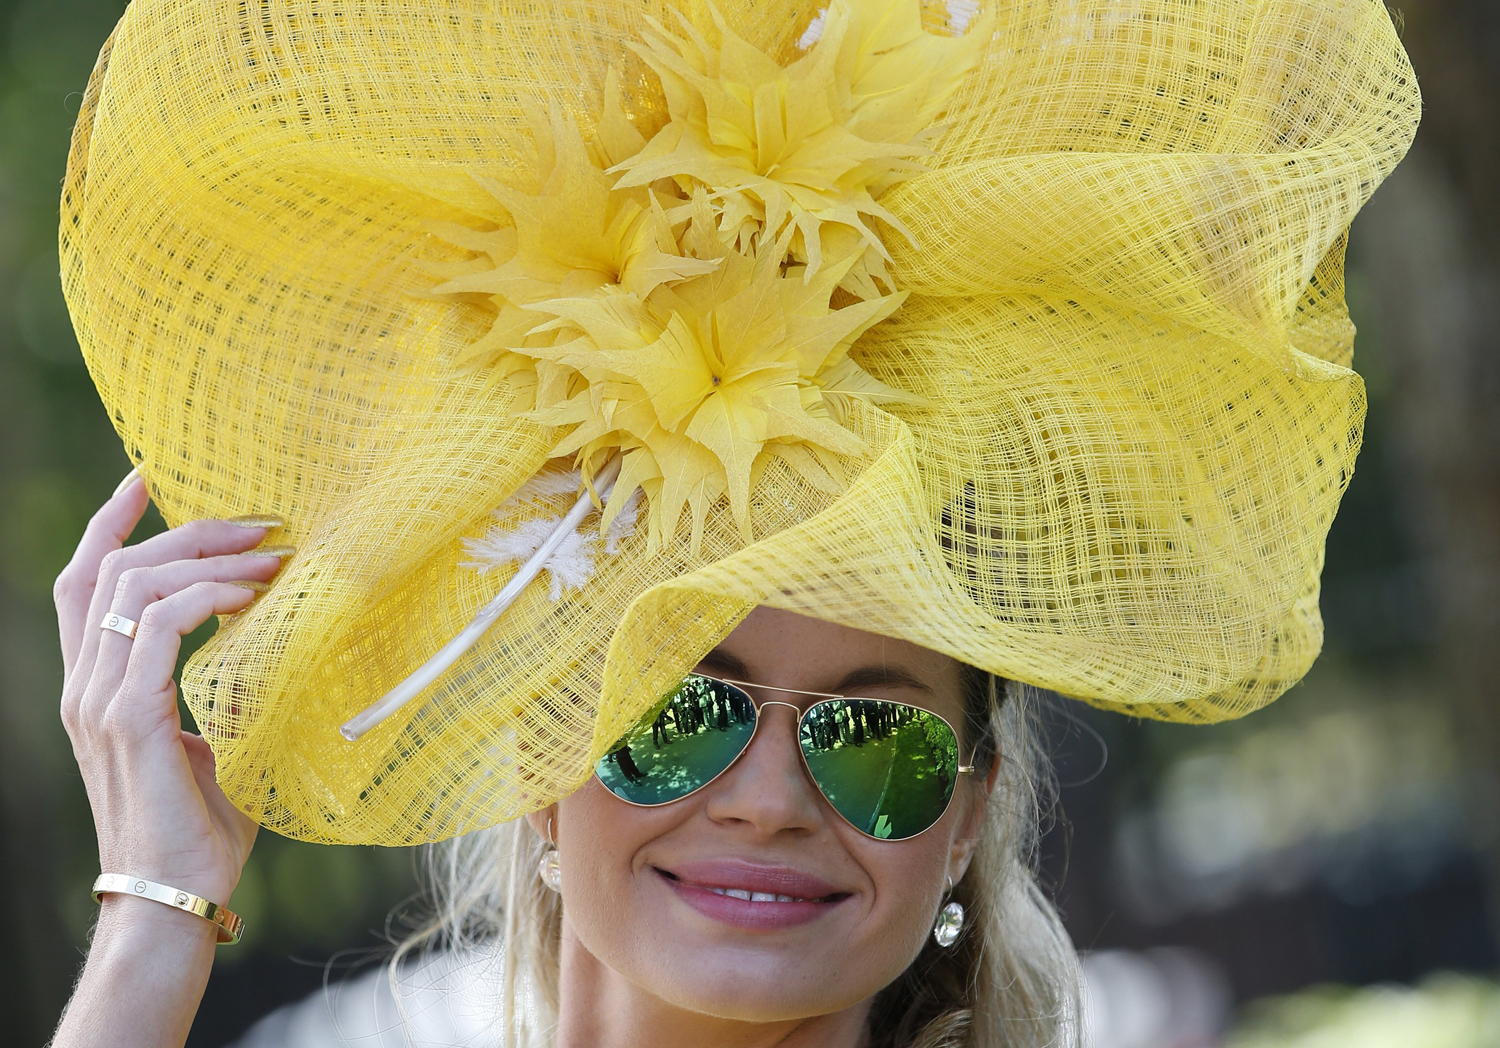 Ester Dohnalova poses for a photograph, on the first day of the Royal Ascot horse racing meeting, in Ascot, England, June 17, 2014.